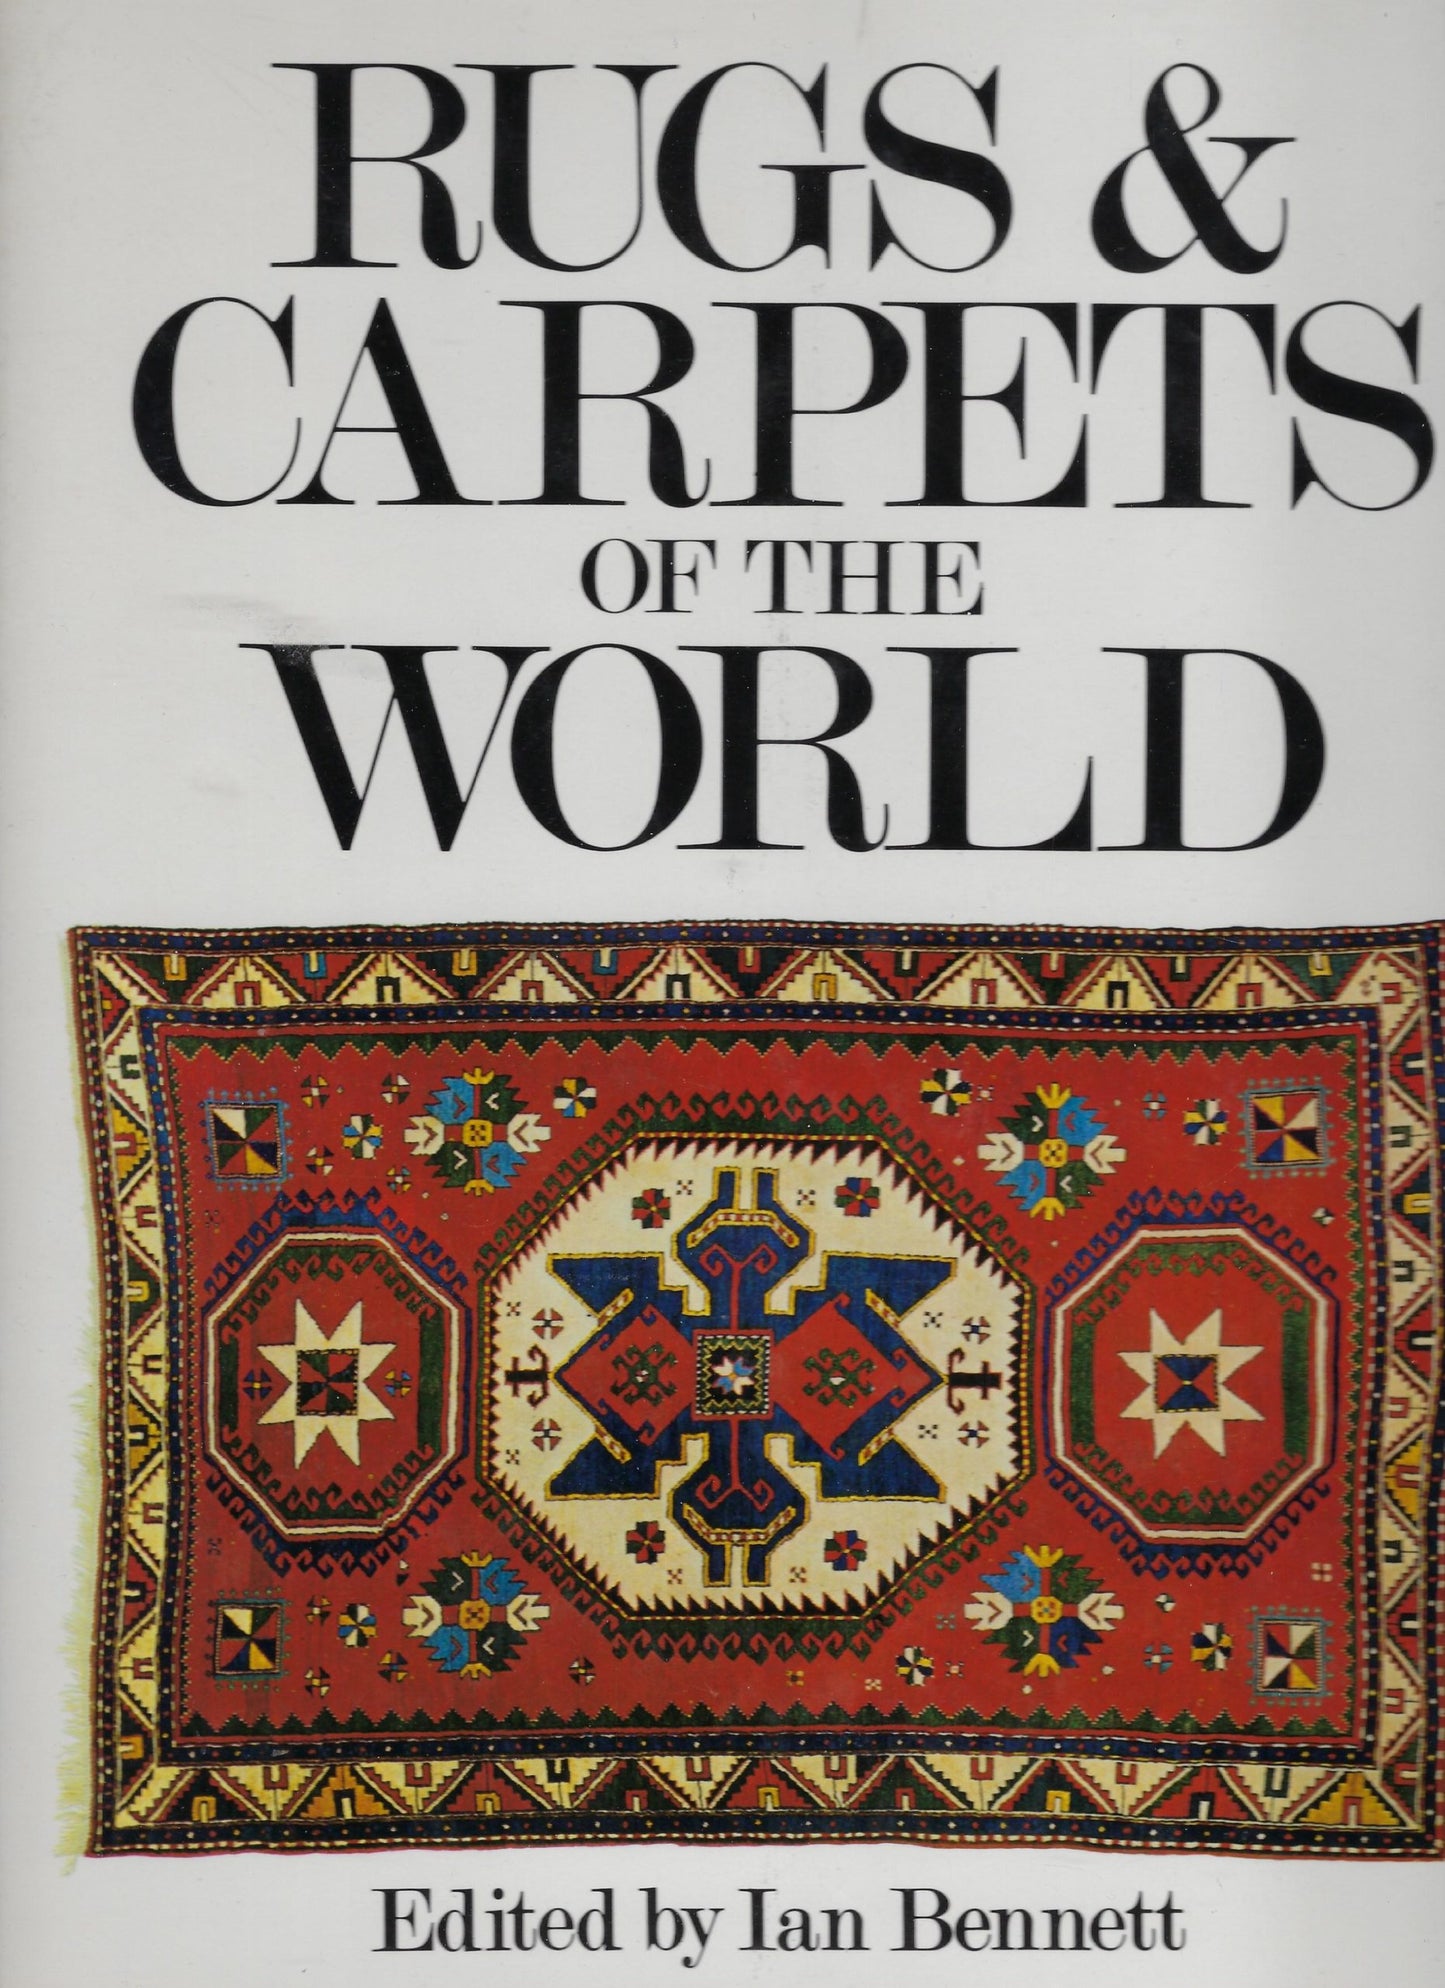 Rugs & carpets of the world